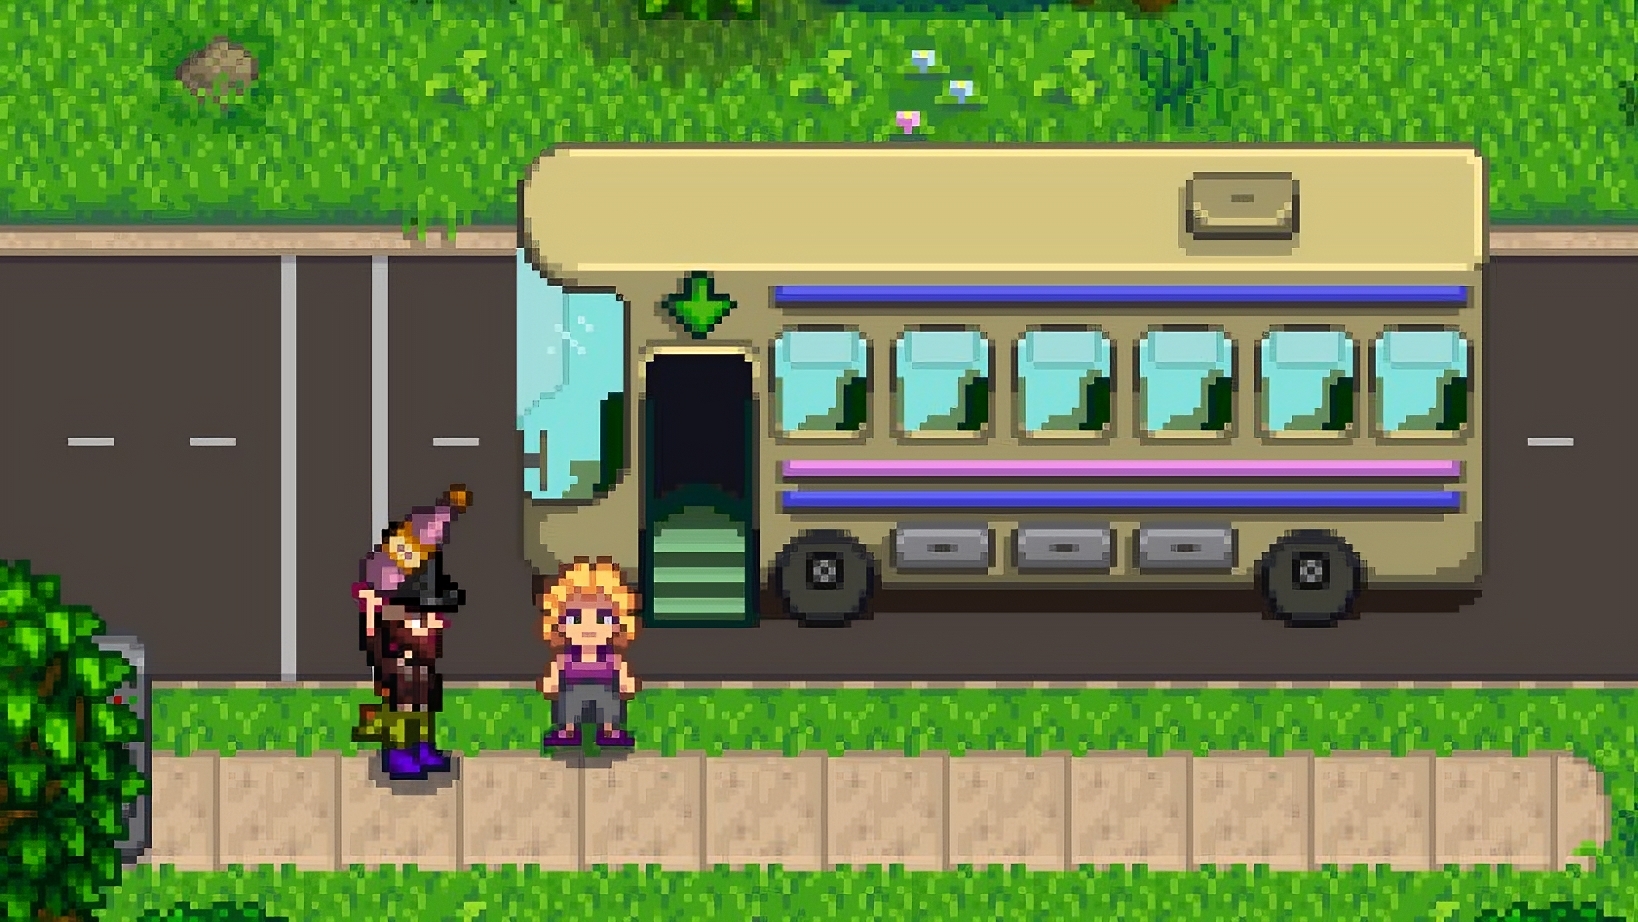  As an old guy playing Stardew Valley, I should be allowed to date the bus driver 